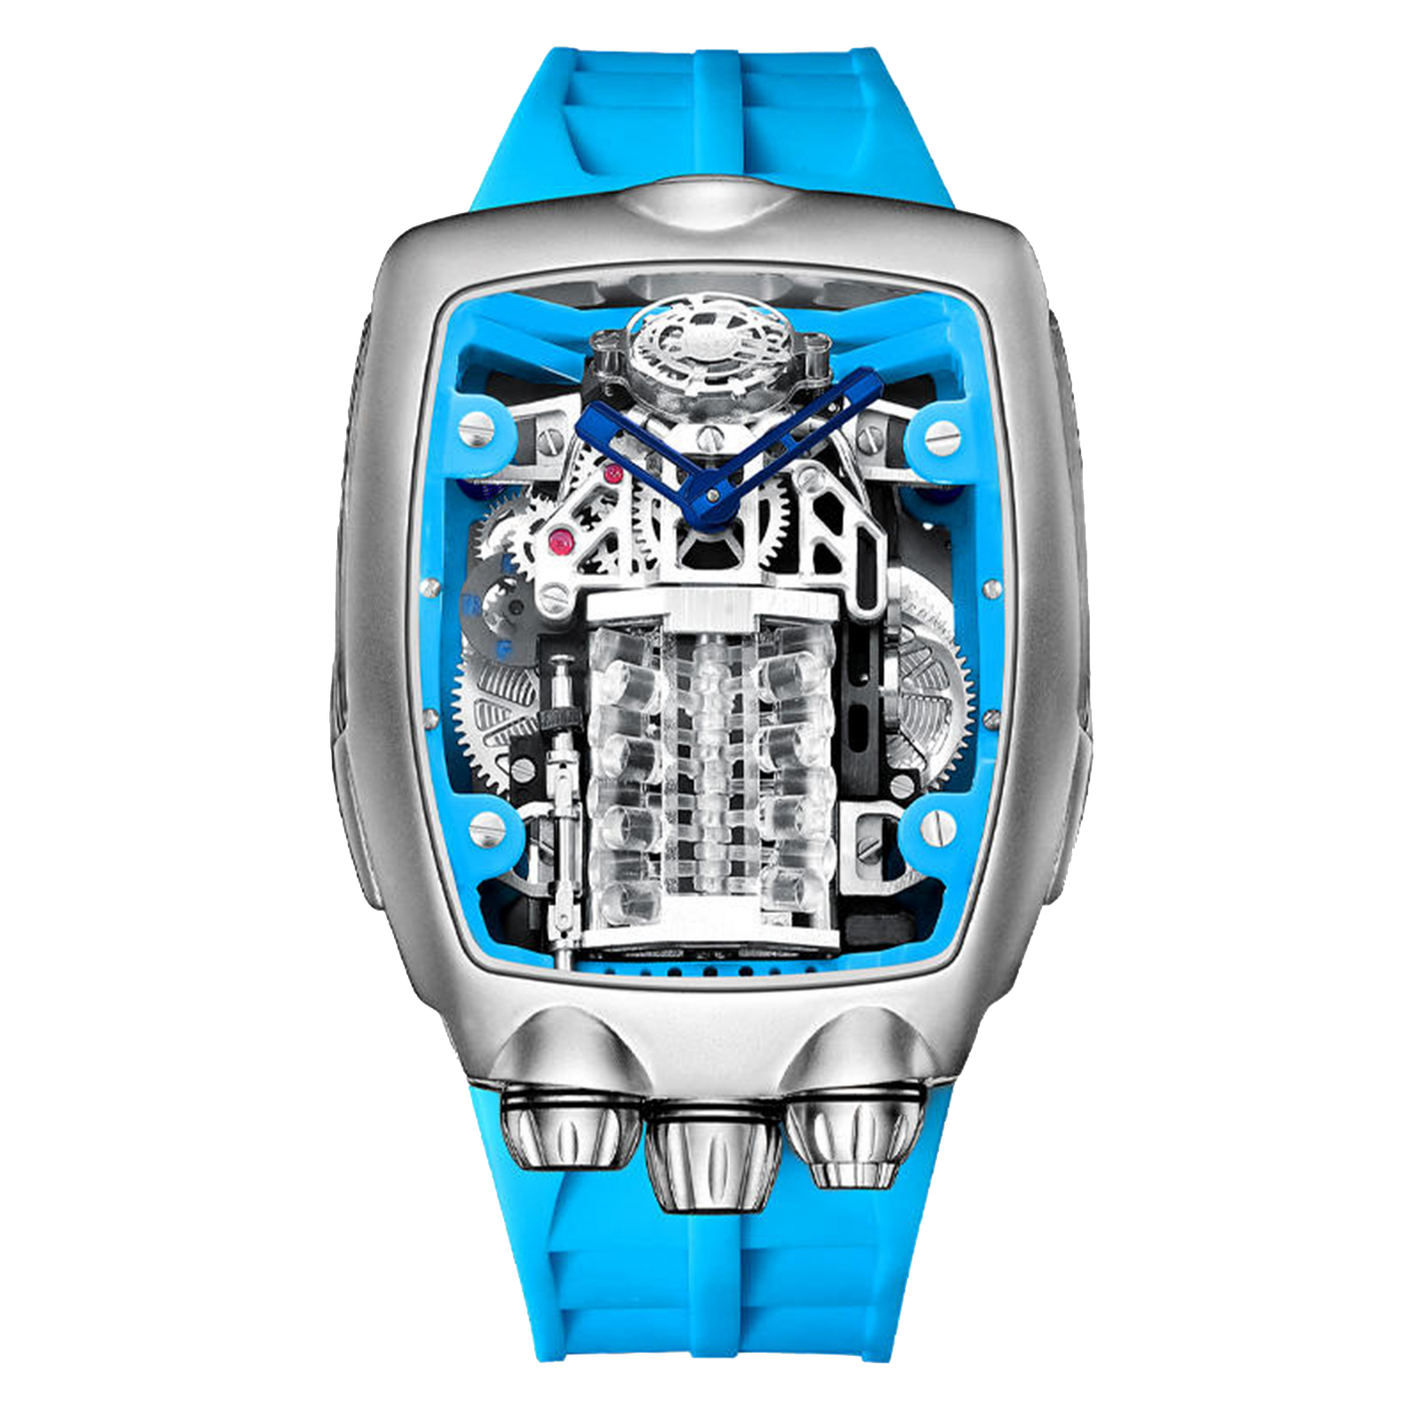 Luxury OBLVLO BG Racing Engine Series Unique Skeleton Automatic Mechanical Watch For Men